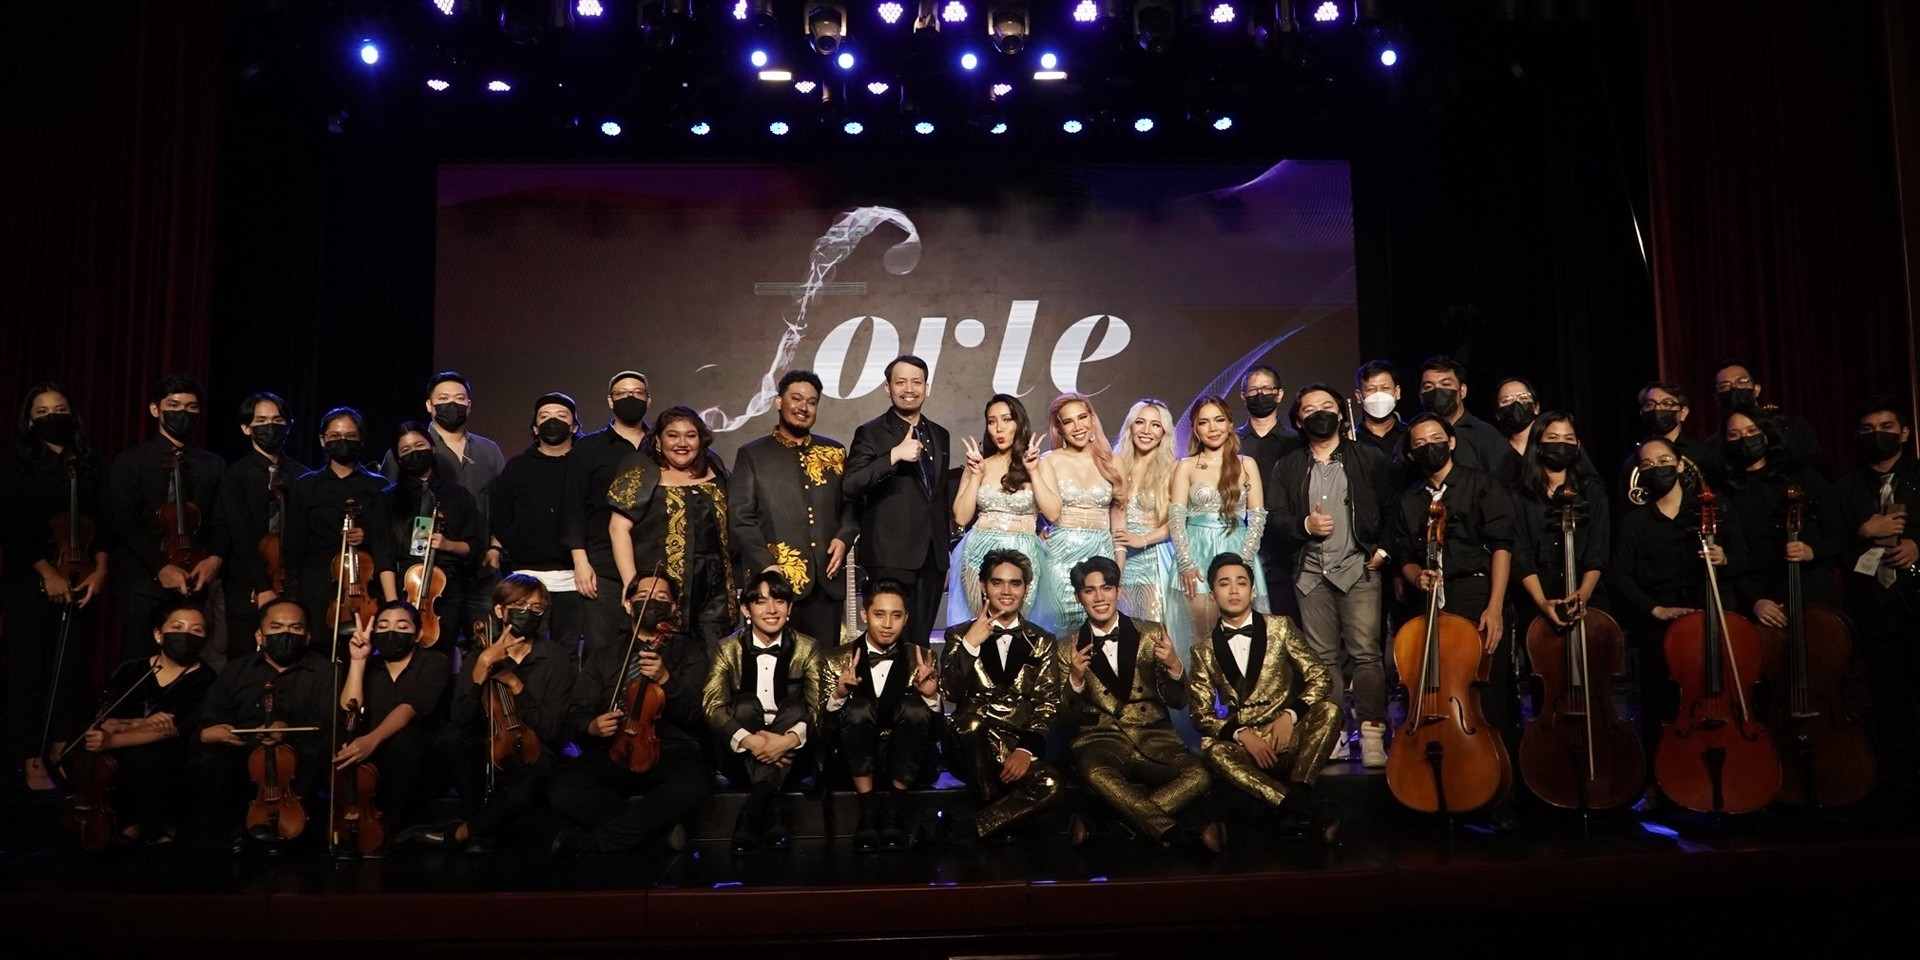 SB19 and 4th Impact stun fans with reimagined hits at Forte: A Benefit Pop Orchestra Concert – gig review